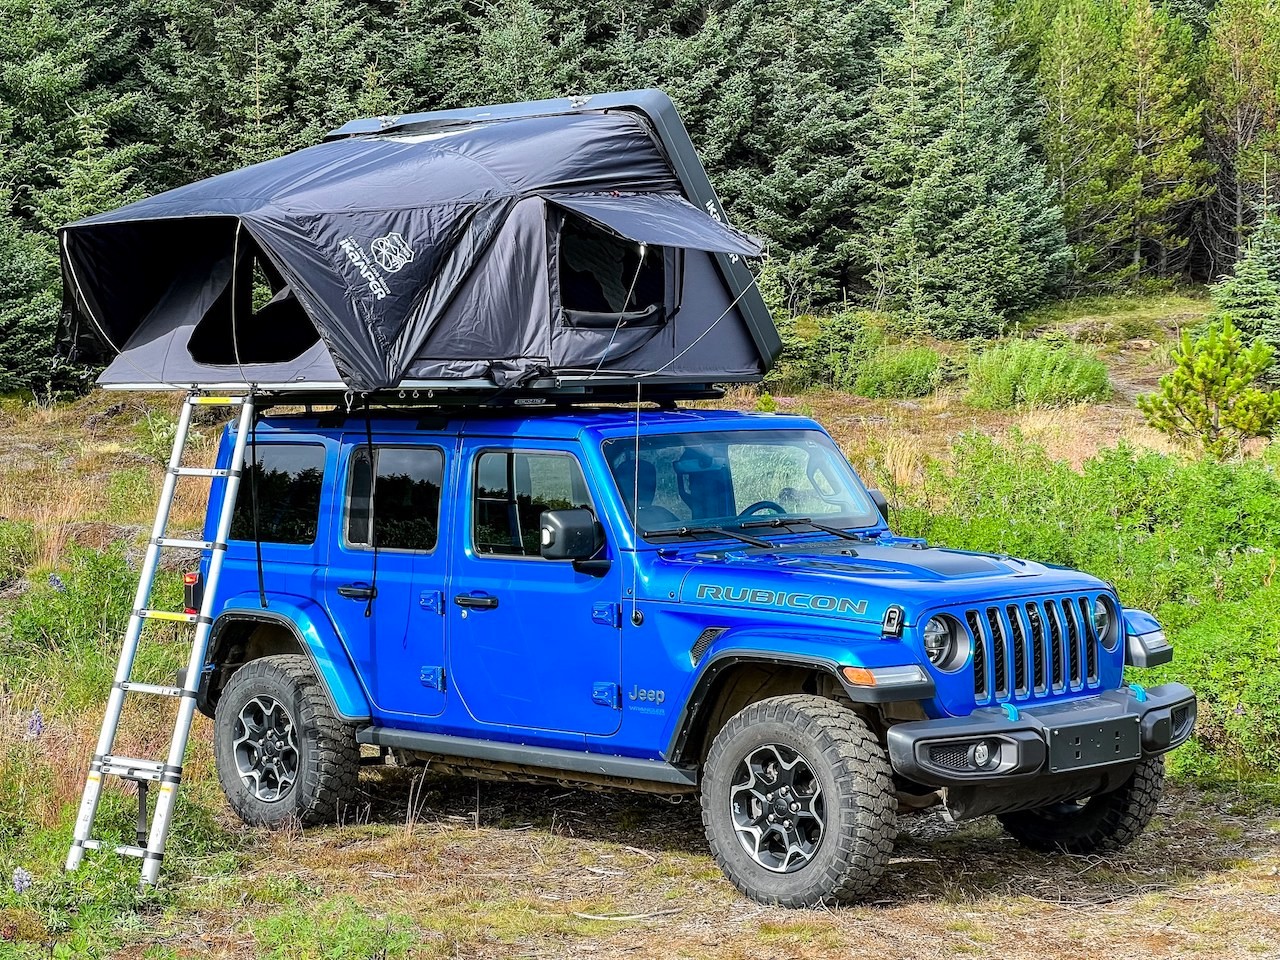 The Definitive Guide for the Best Jeep Rental in Maui 2023